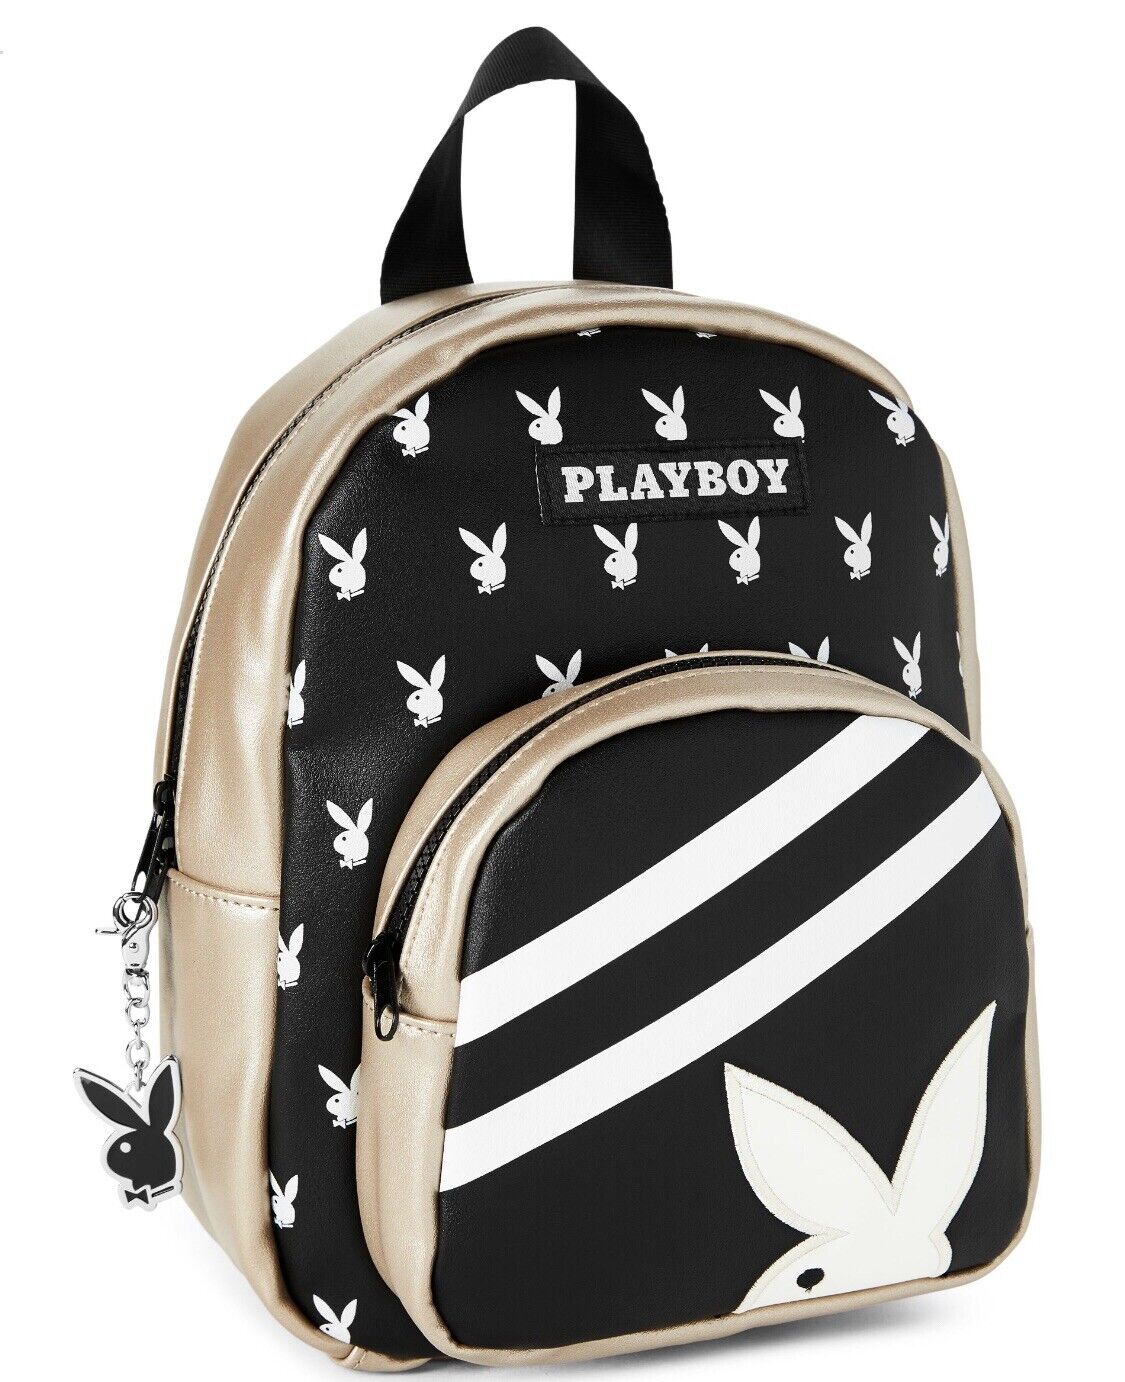 Official PLAYBOY Black Silver White Bunny Mini Backpack Brand New NWT